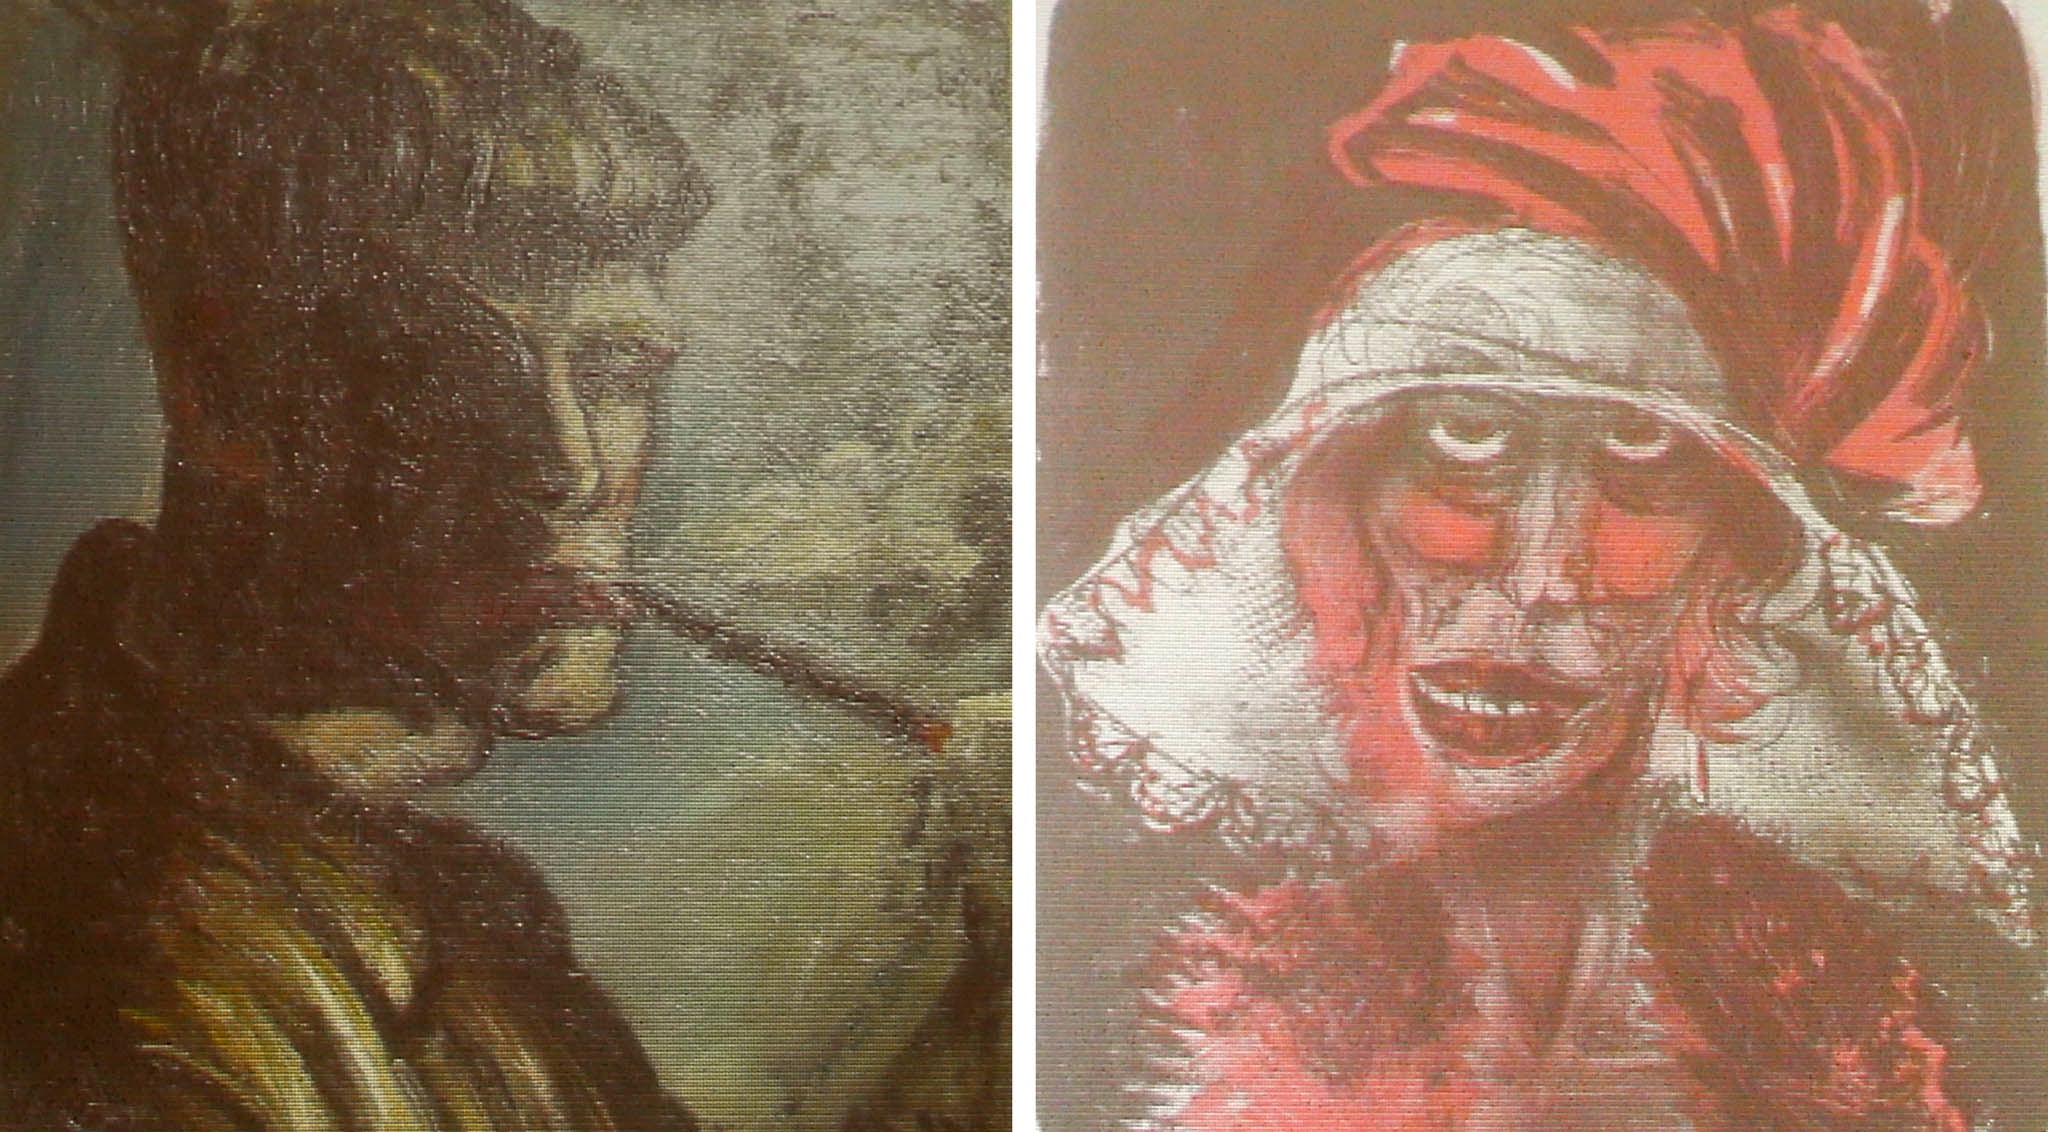 Two formerly unknown paintings by German artist Otto Dix, two of 1,500 artworks seized by the Nazis discovered in a Munich flat